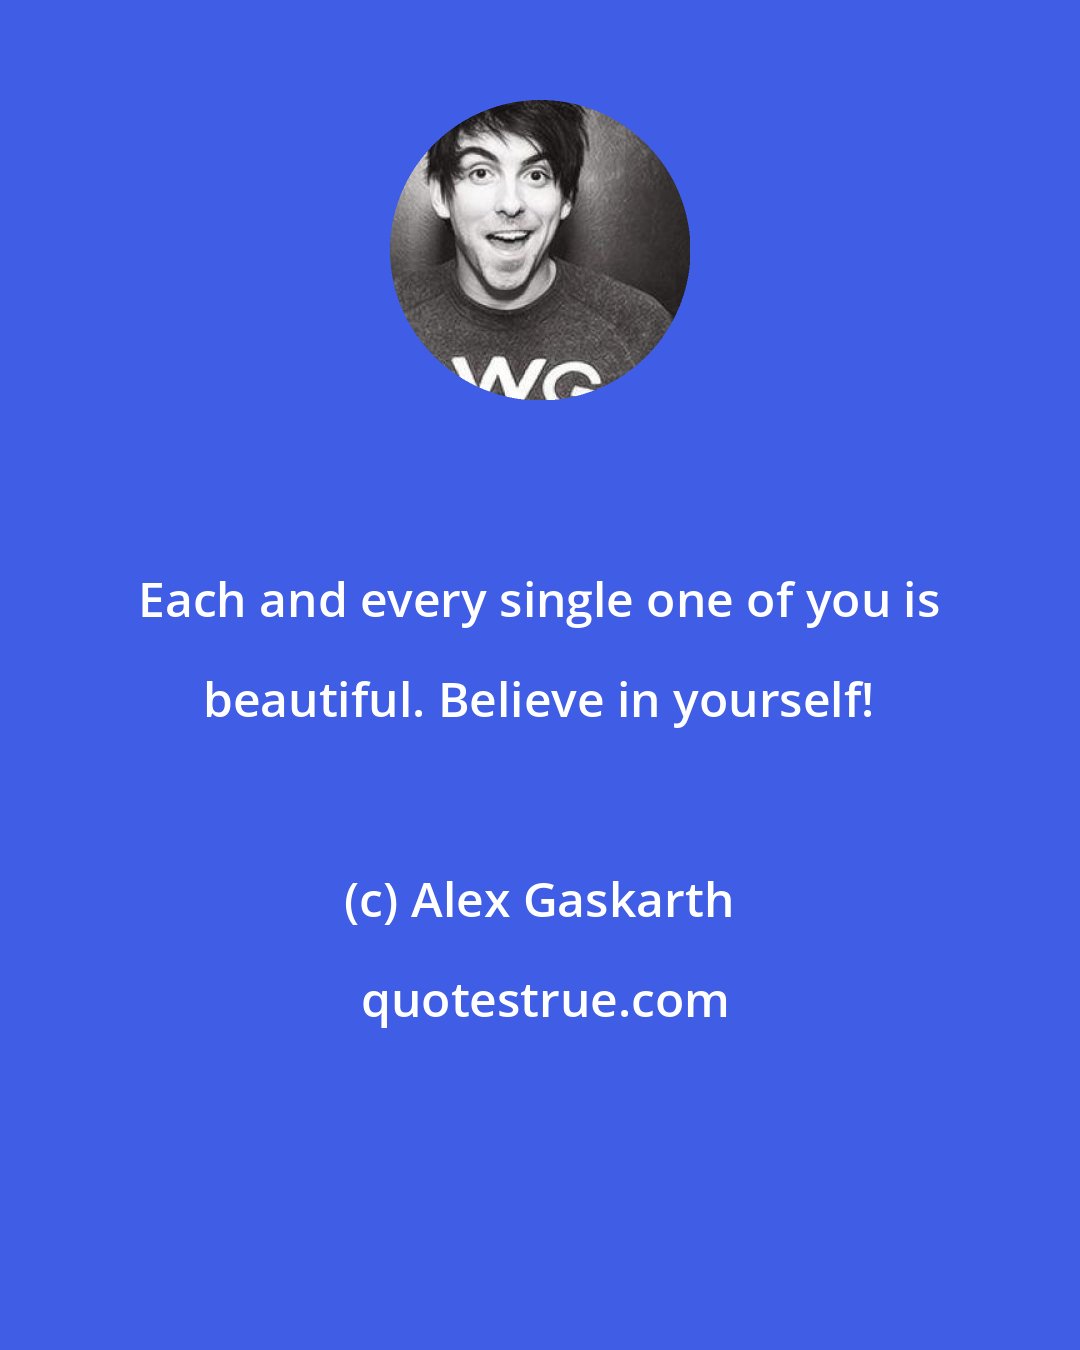 Alex Gaskarth: Each and every single one of you is beautiful. Believe in yourself!